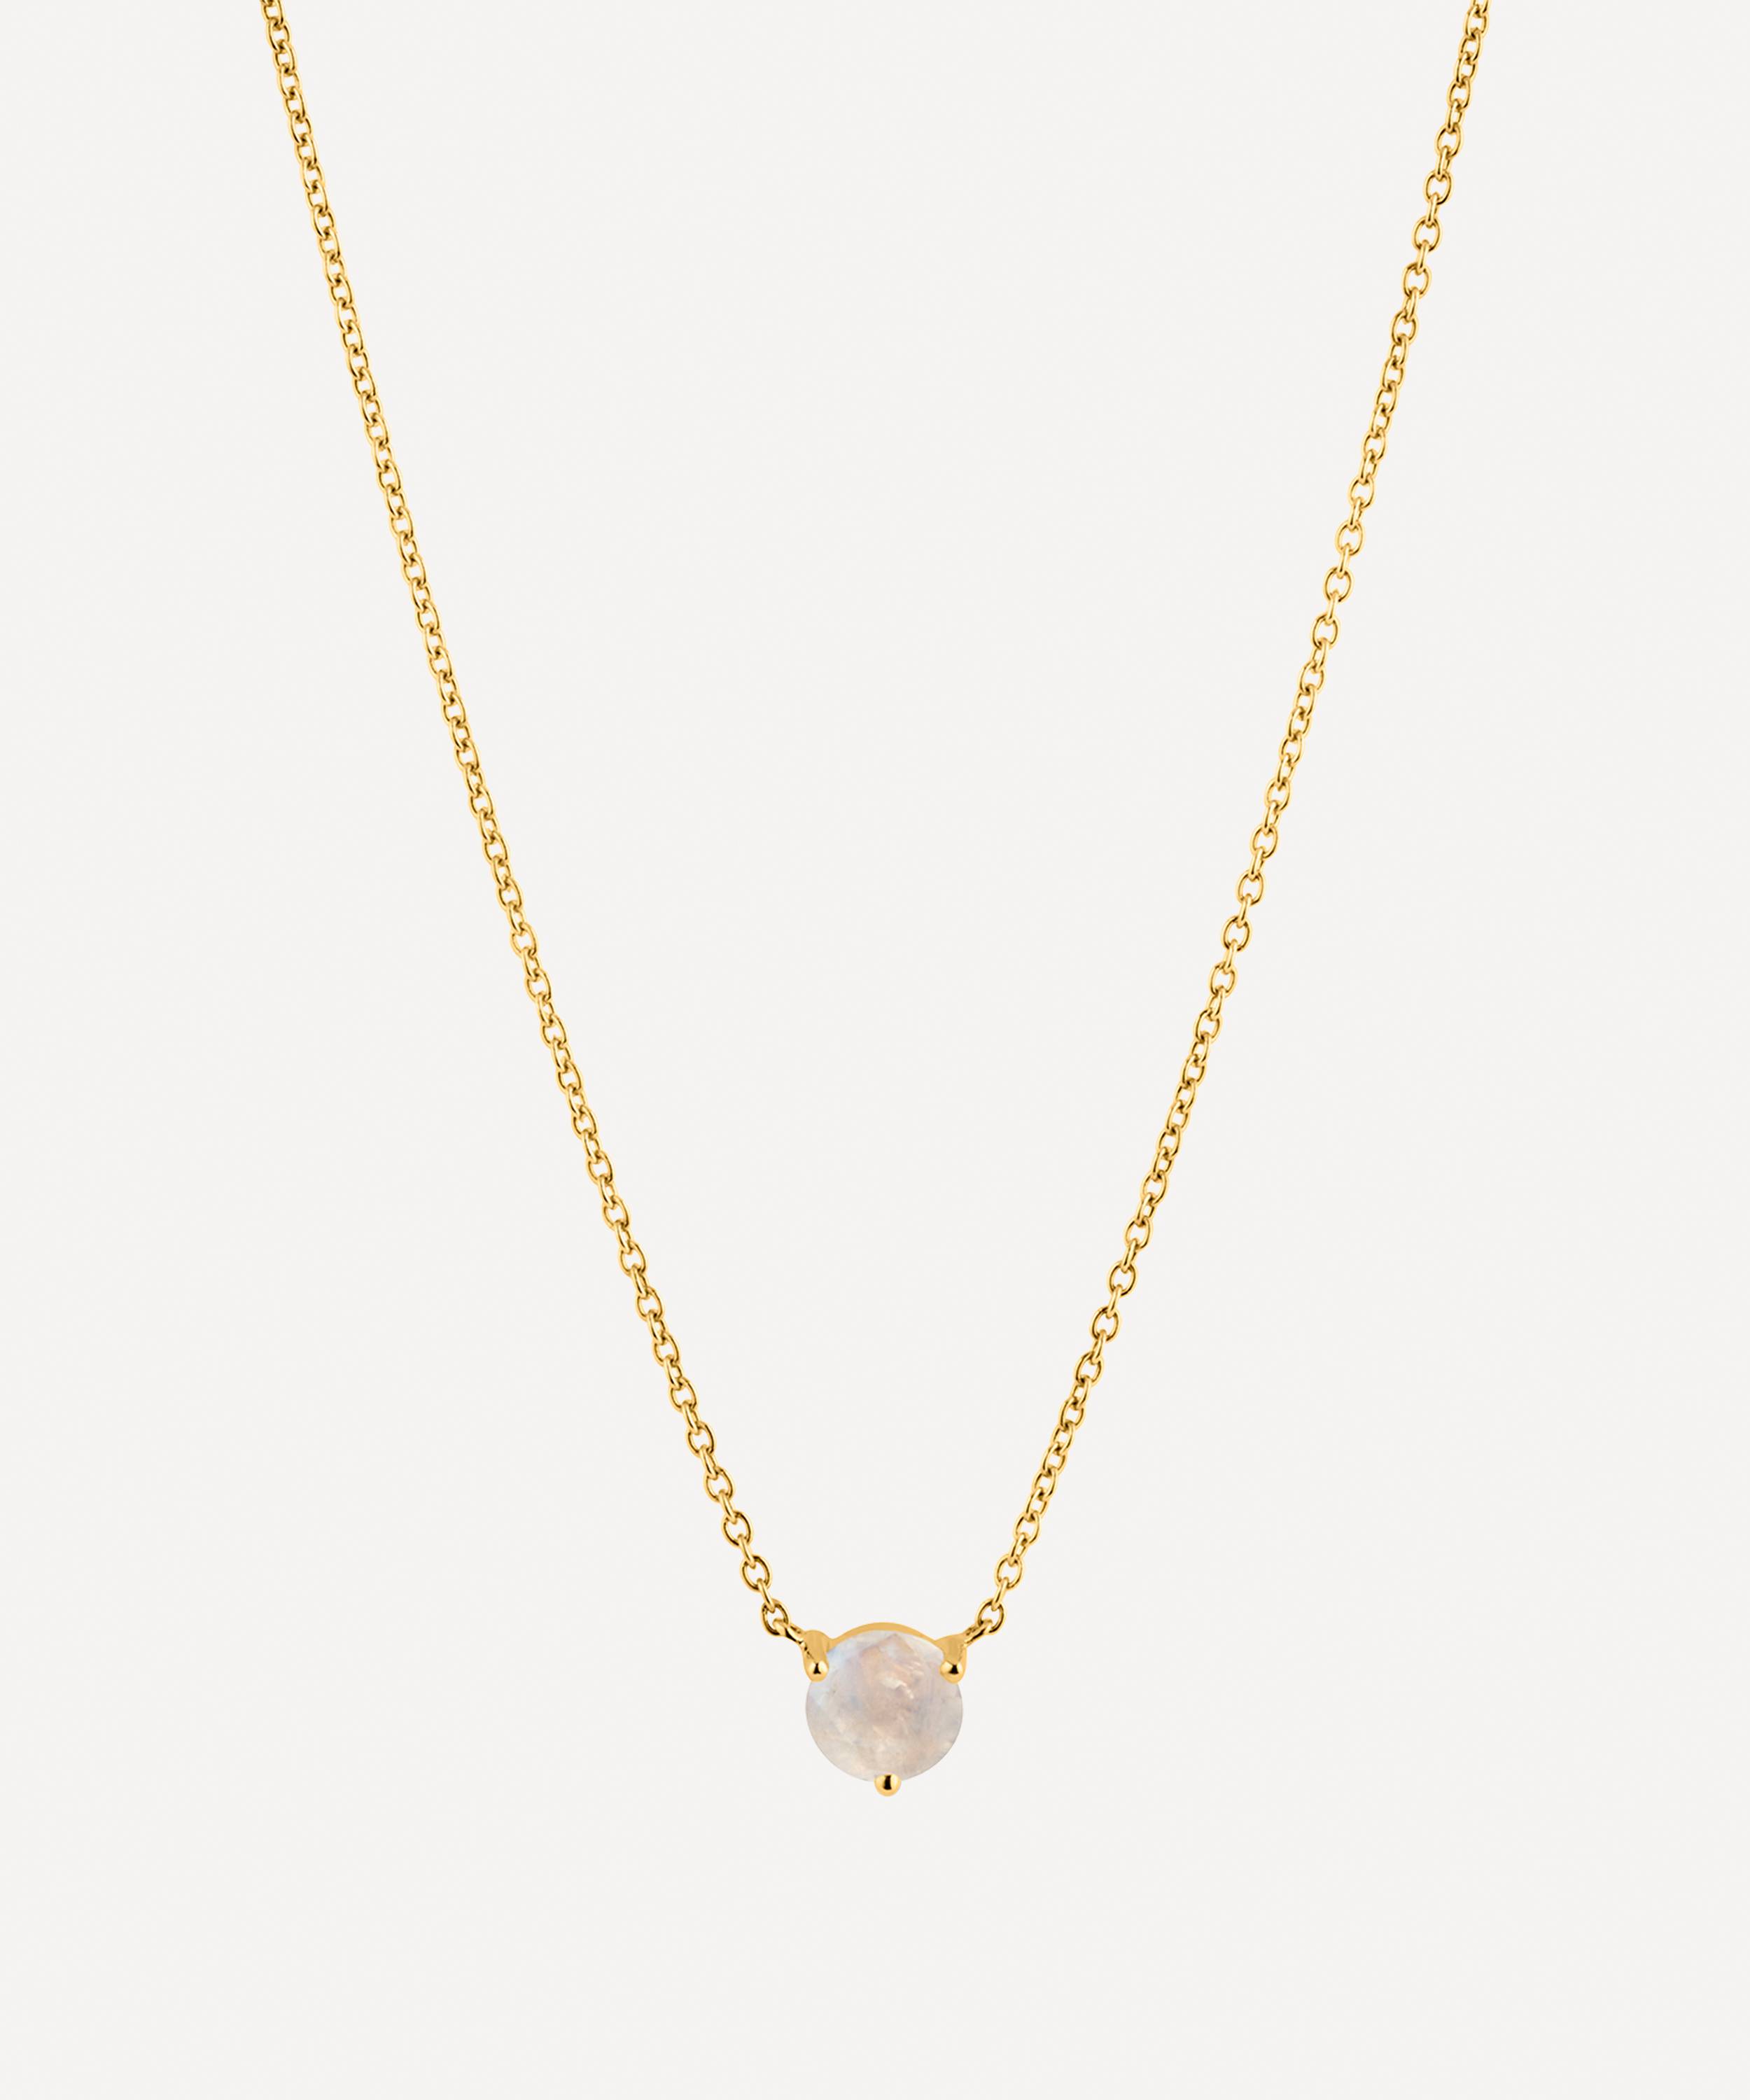 Dinny Hall 14ct Gold Moonstone Pendant Necklace | Liberty